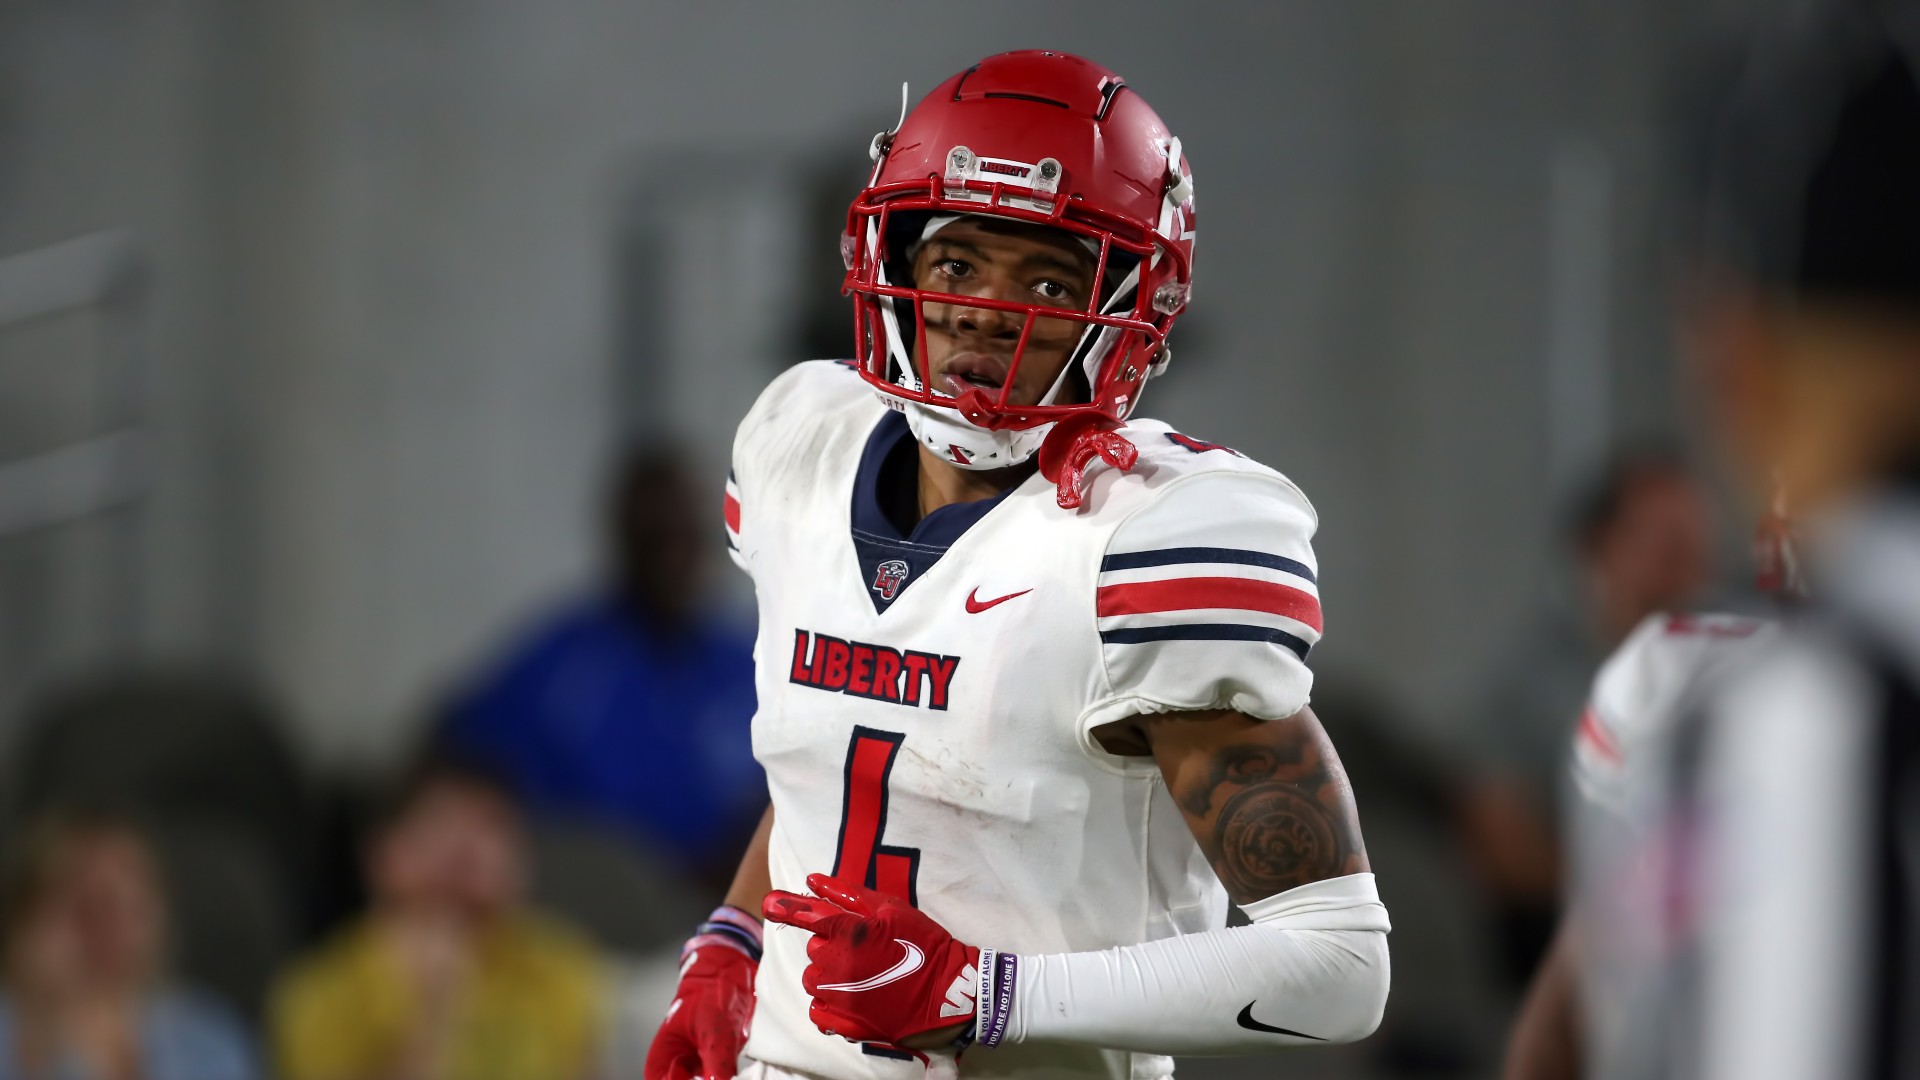 College Football Odds, Picks, Predictions for Middle Tennessee vs. Liberty: Where Does The Value Lie? article feature image